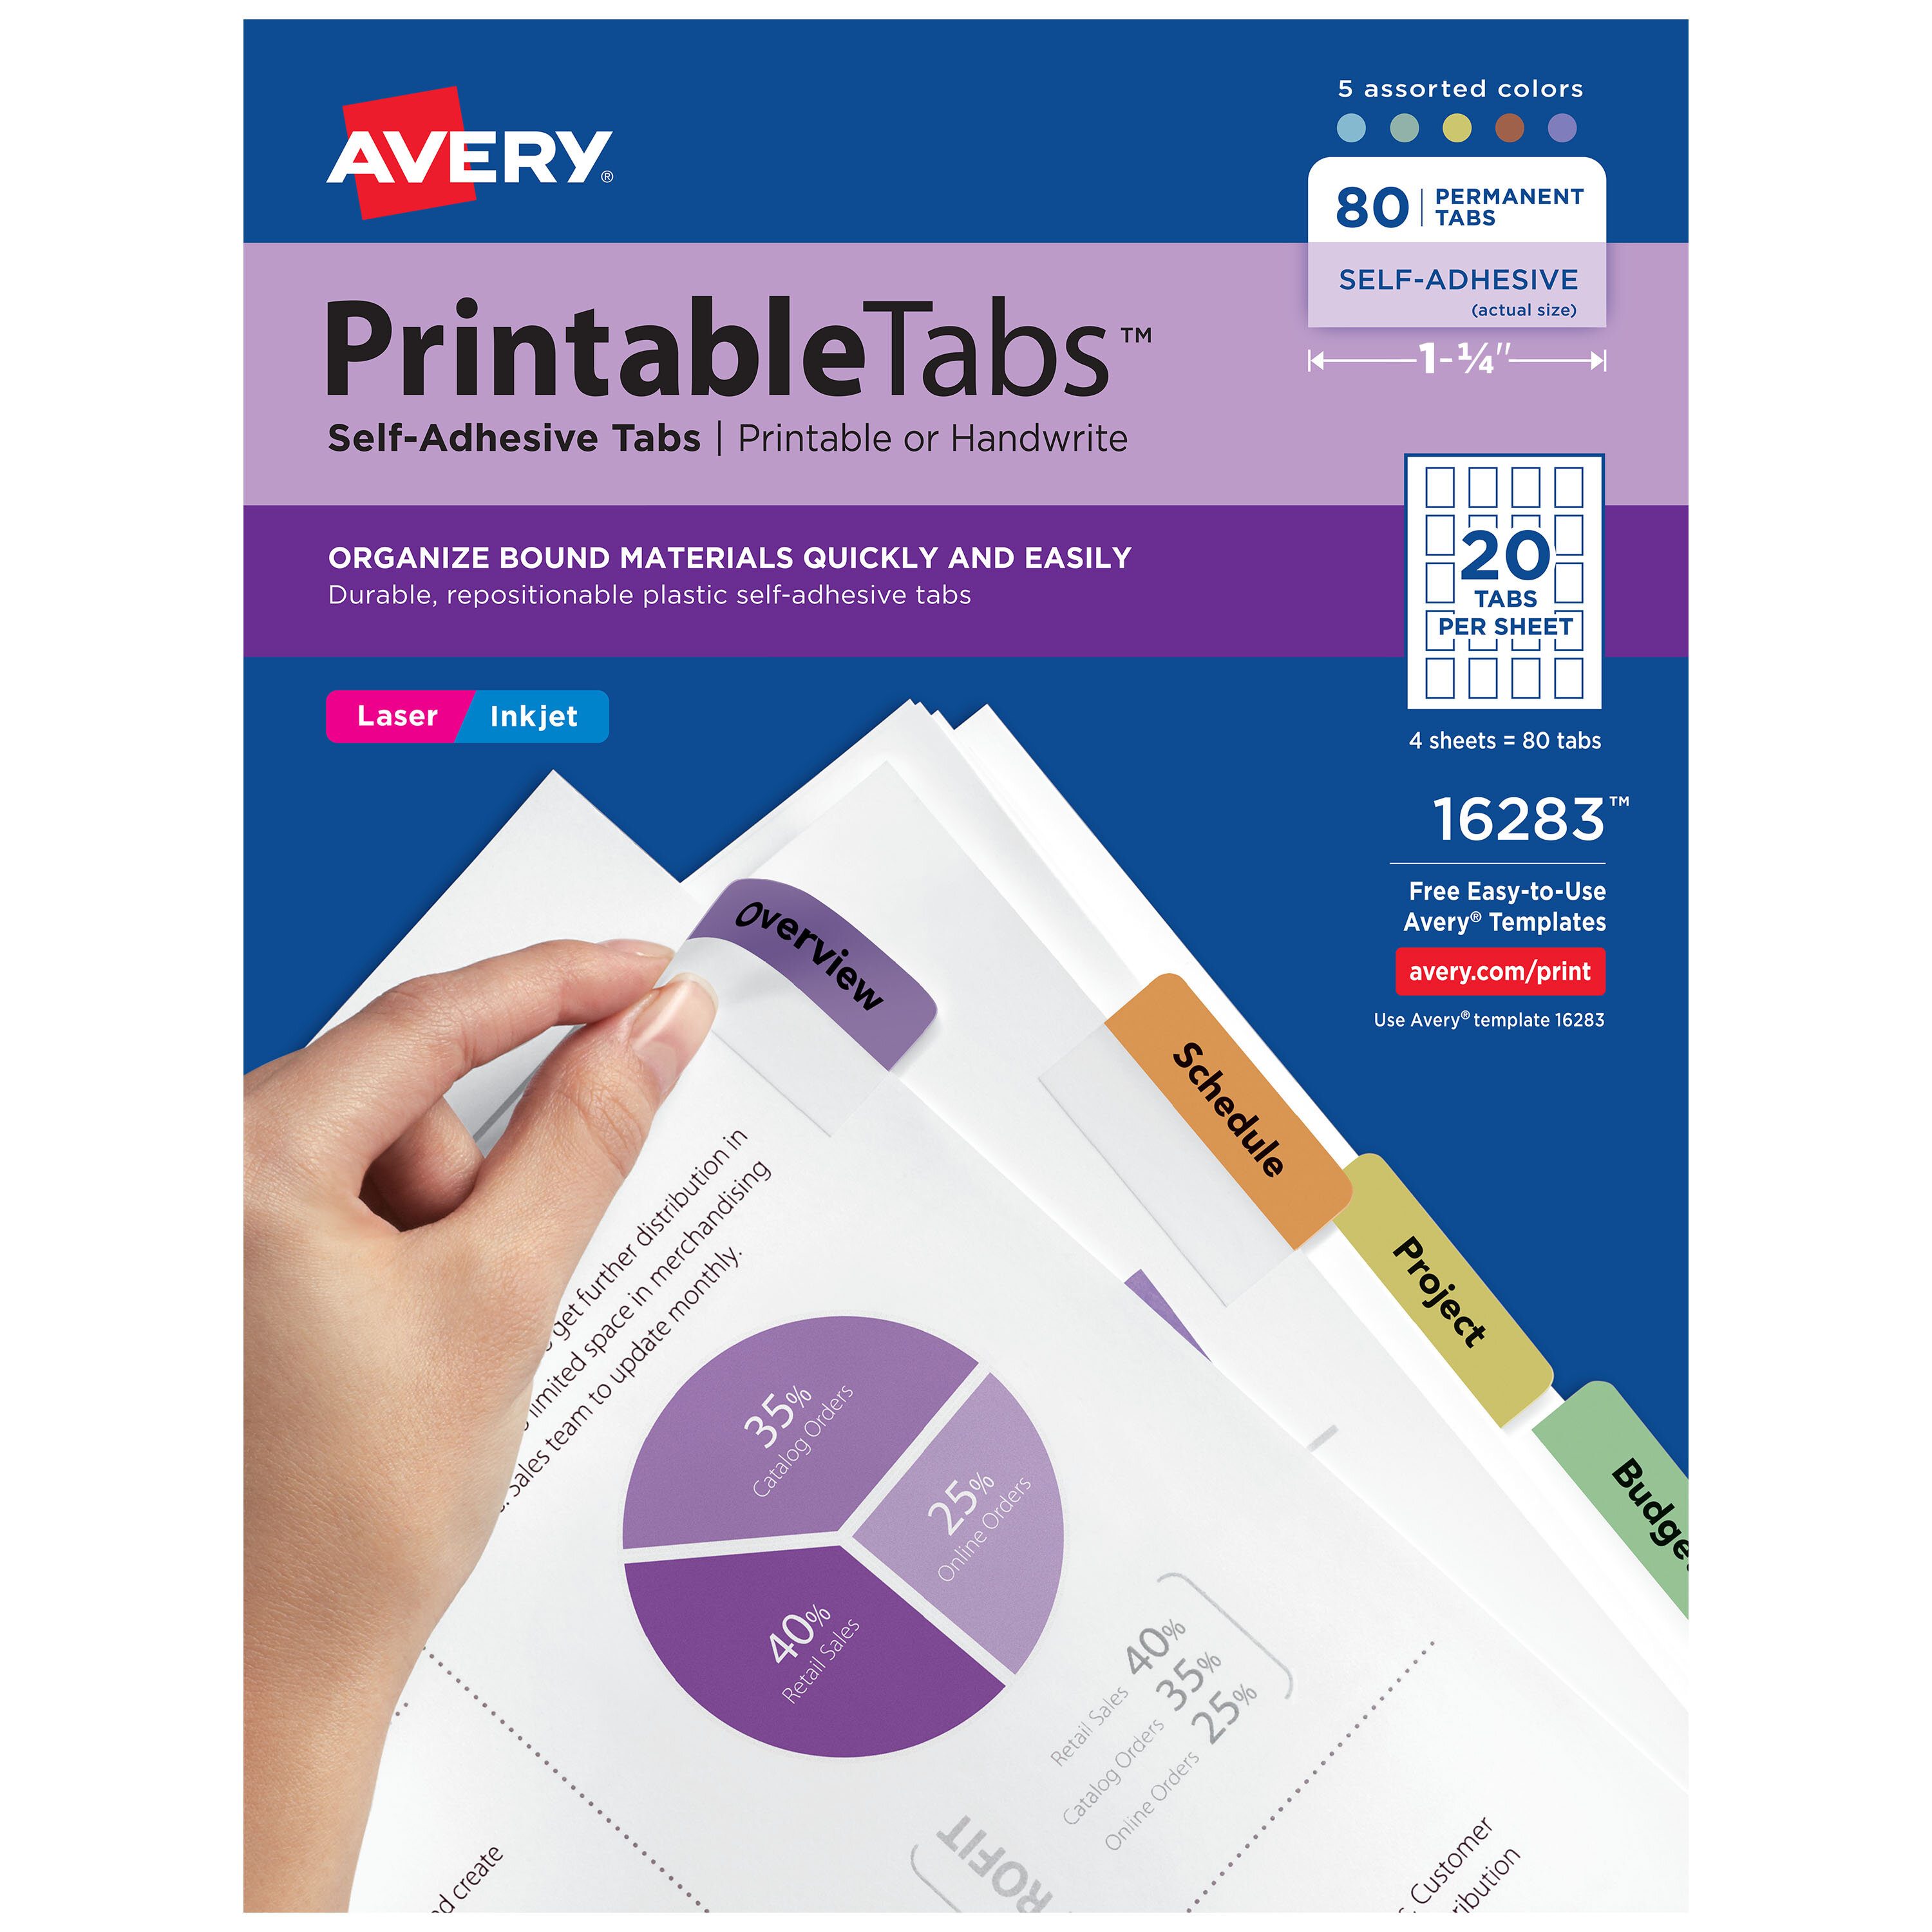 Printable Self-Adhesive Tabs 1.75" x 1" AVERY 16283 80/Pk 5 Assorted Colors 